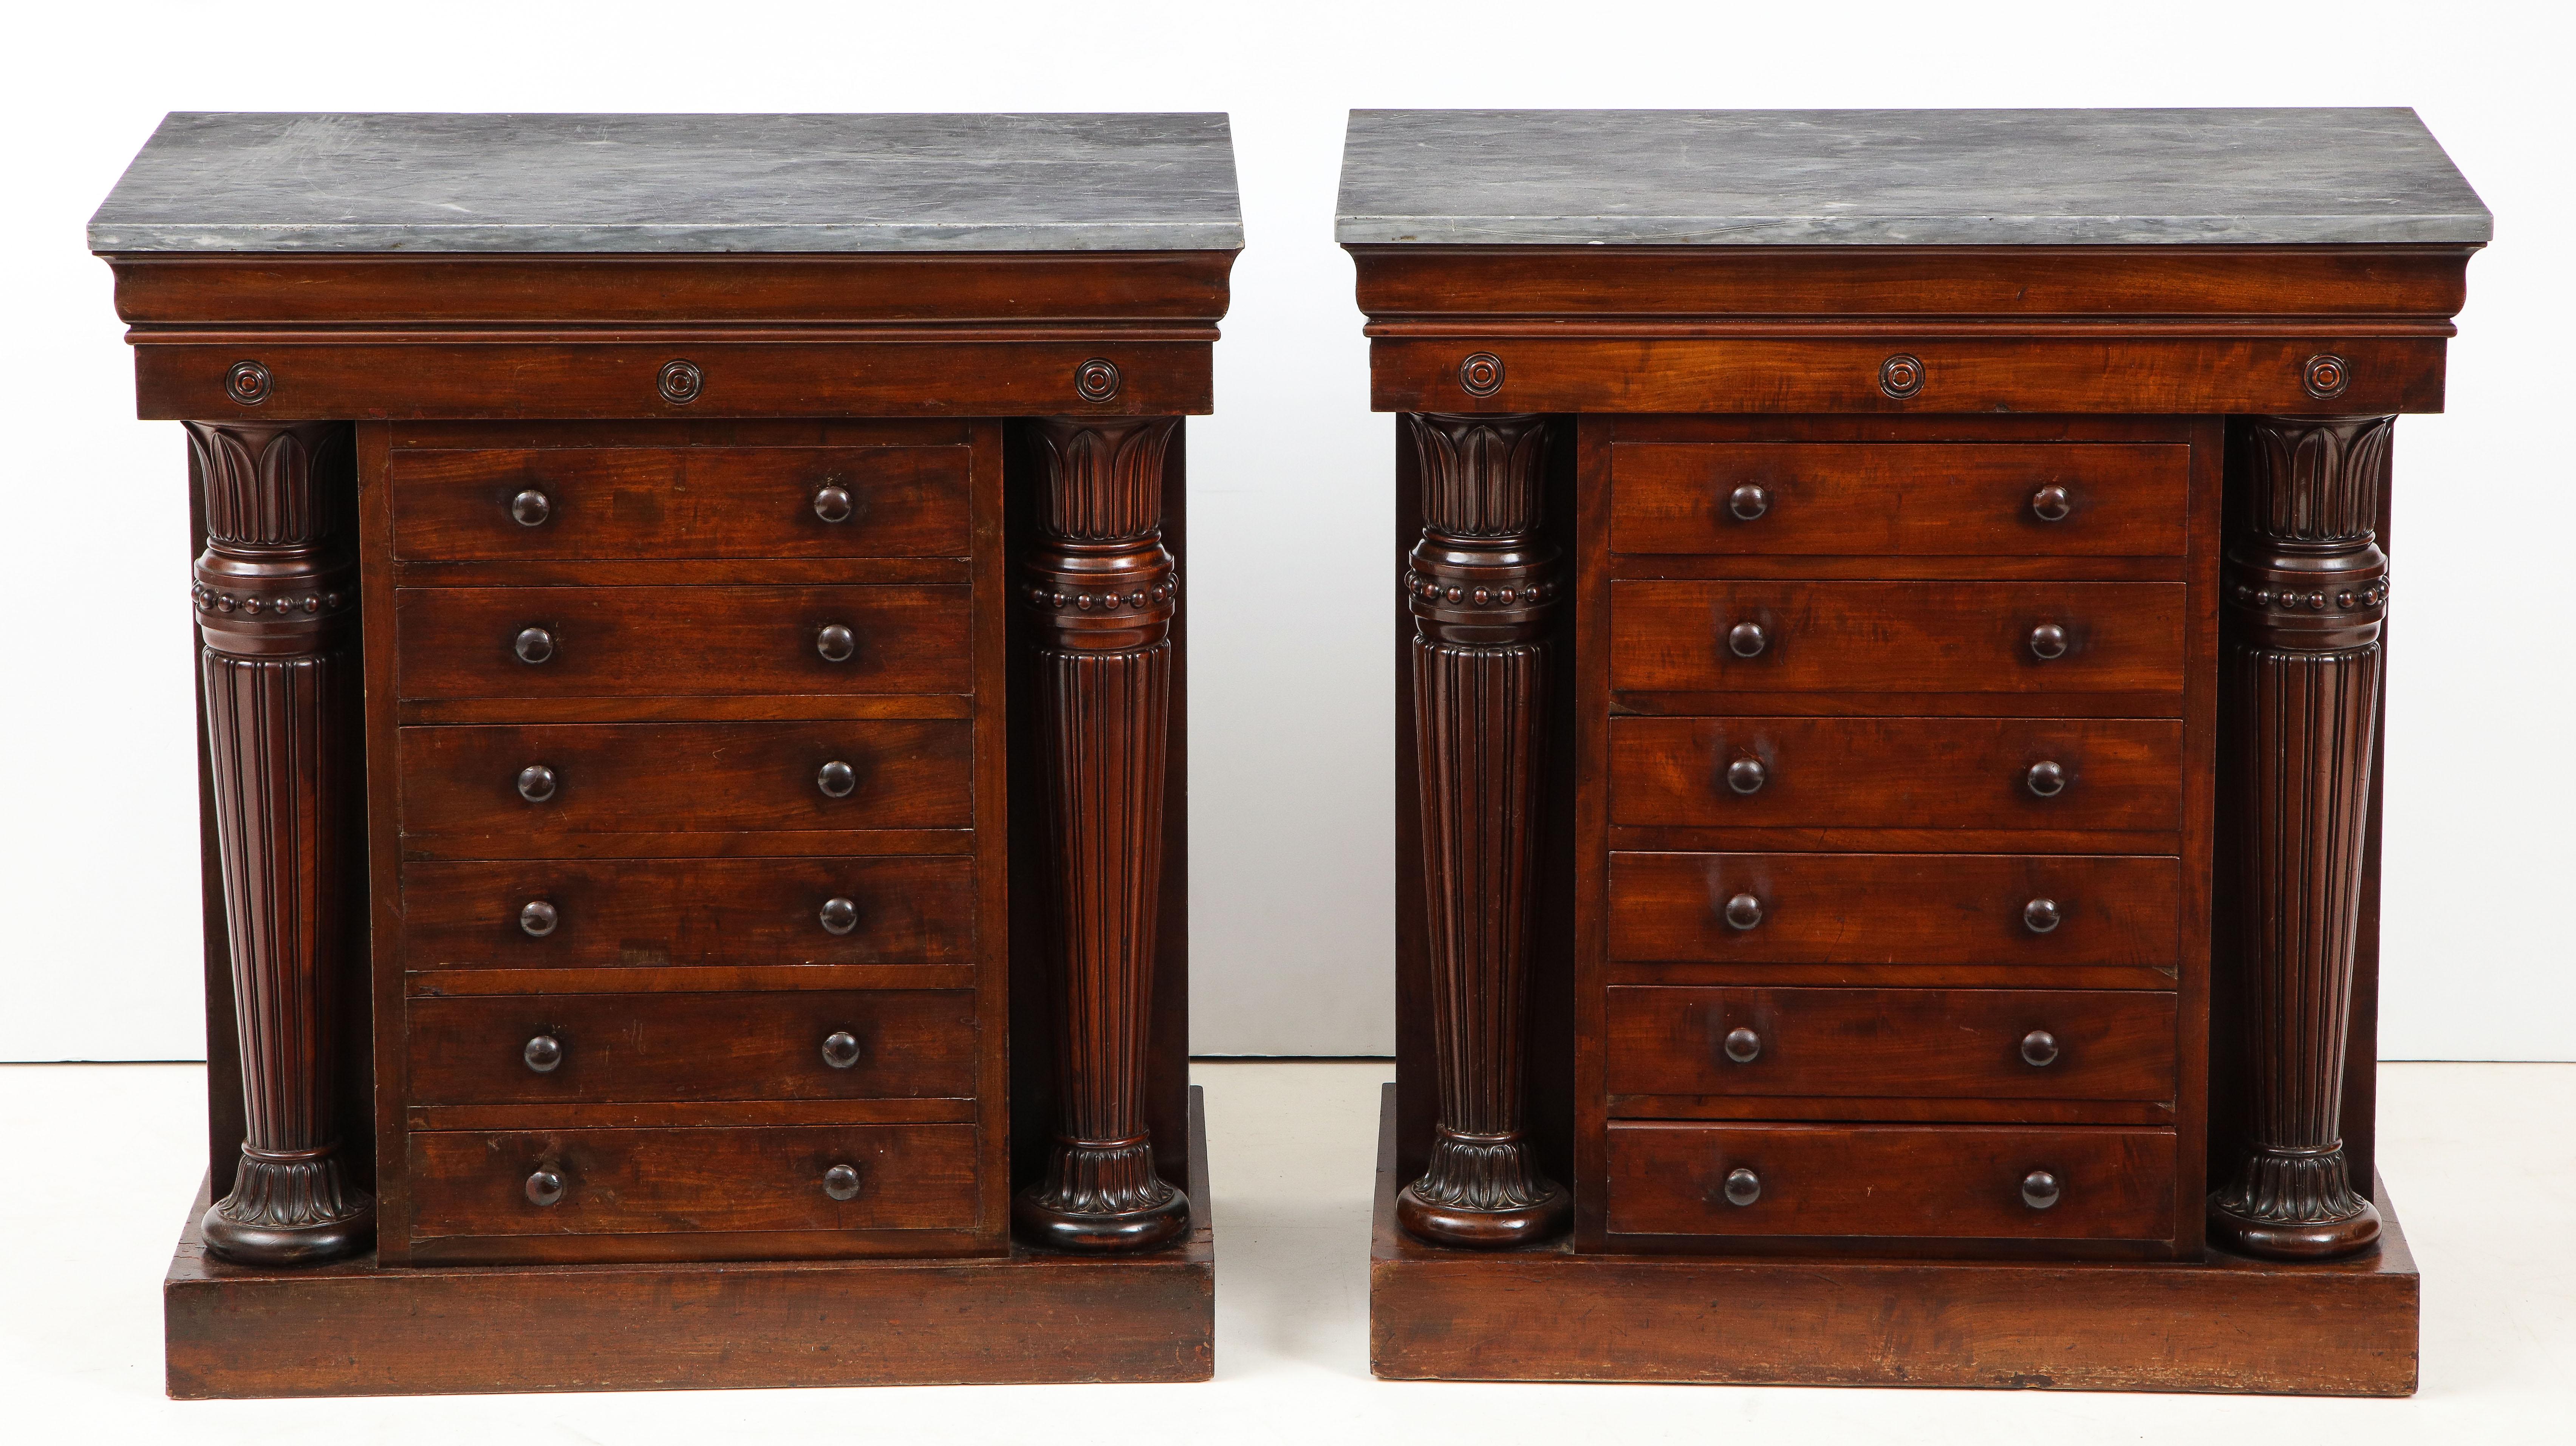 Fine pair of George IV collector’s cabinets in the Grecian manner popularized by Thomas Hope and George Smith having Santa Anna marble tops over frieze molding with applied bosses, over 6 drawers flanked by Egyptian influenced columns with long leaf